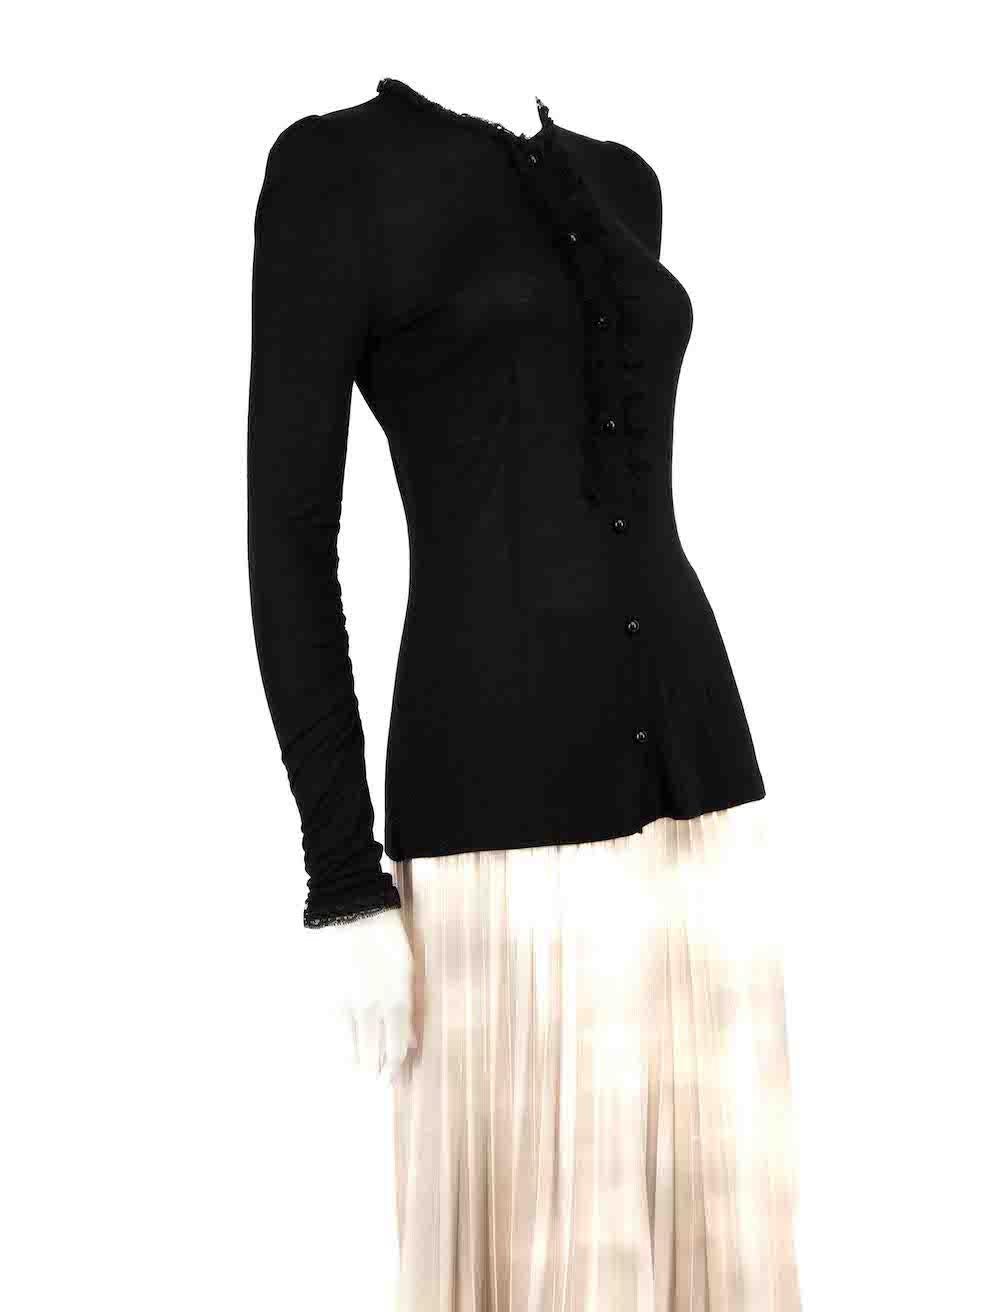 CONDITION is Very good. Hardly any visible wear to top is evident on this used Dolce & Gabbana designer resale item.
 
 
 
 Details
 
 
 Black
 
 Viscose
 
 Long sleeves top
 
 Lace trim detail
 
 Slightly see through
 
 Front button up closure
 
 
